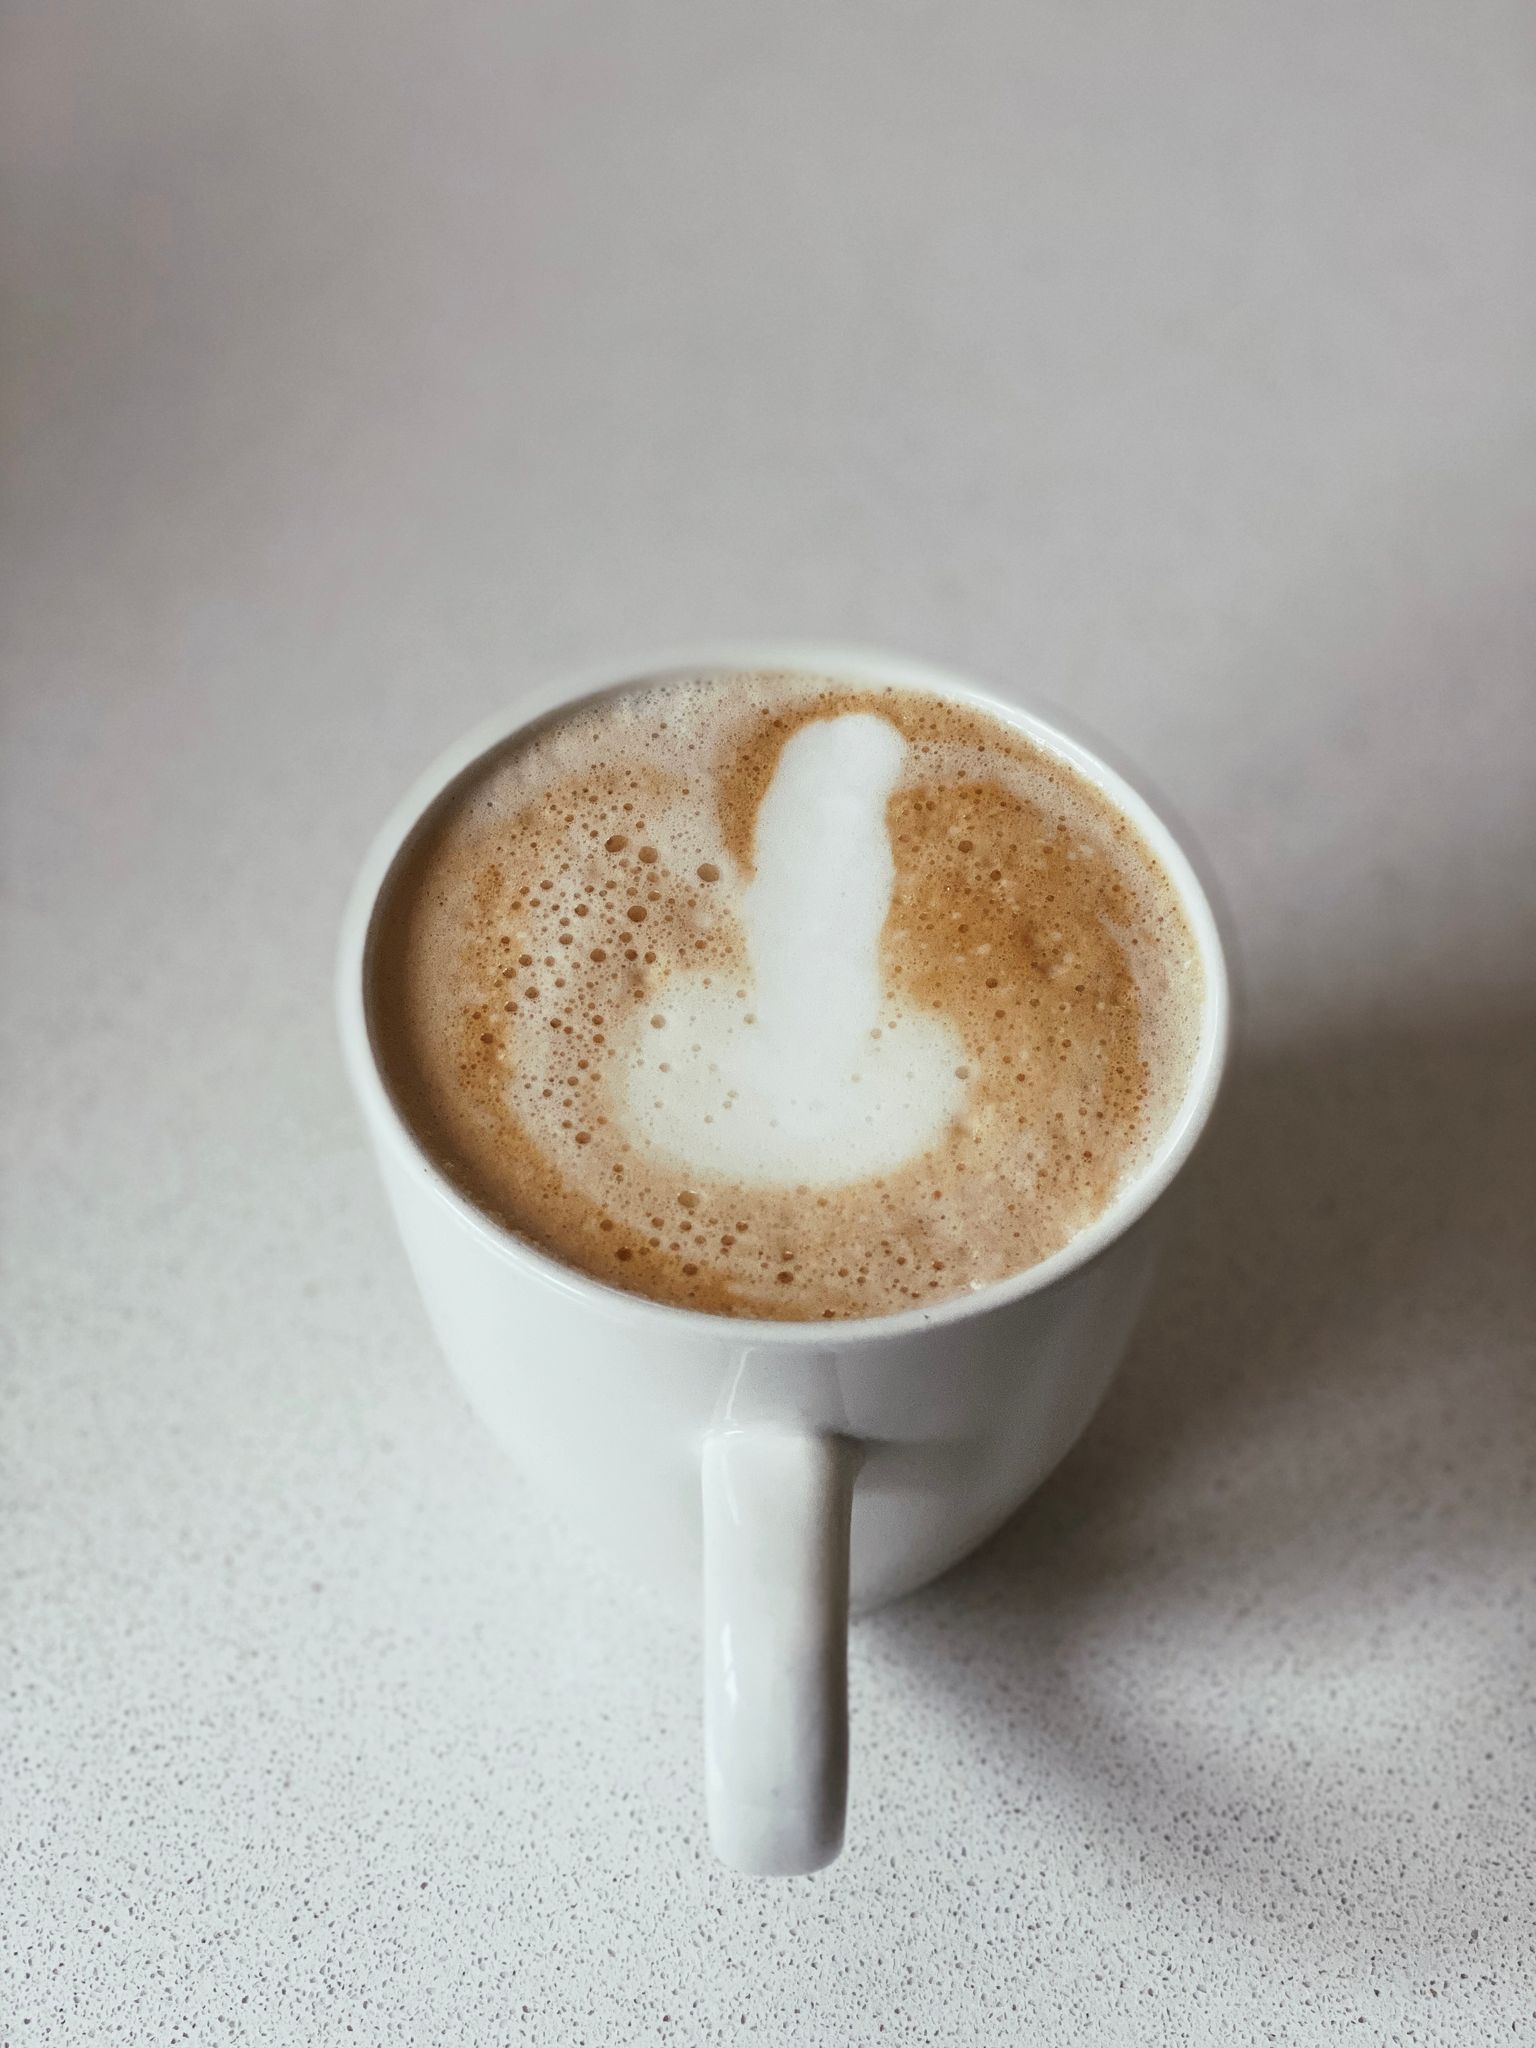 A photo of a mug of coffee with what very much looks like a penis and pair of testicles drawn in the froth at the top.